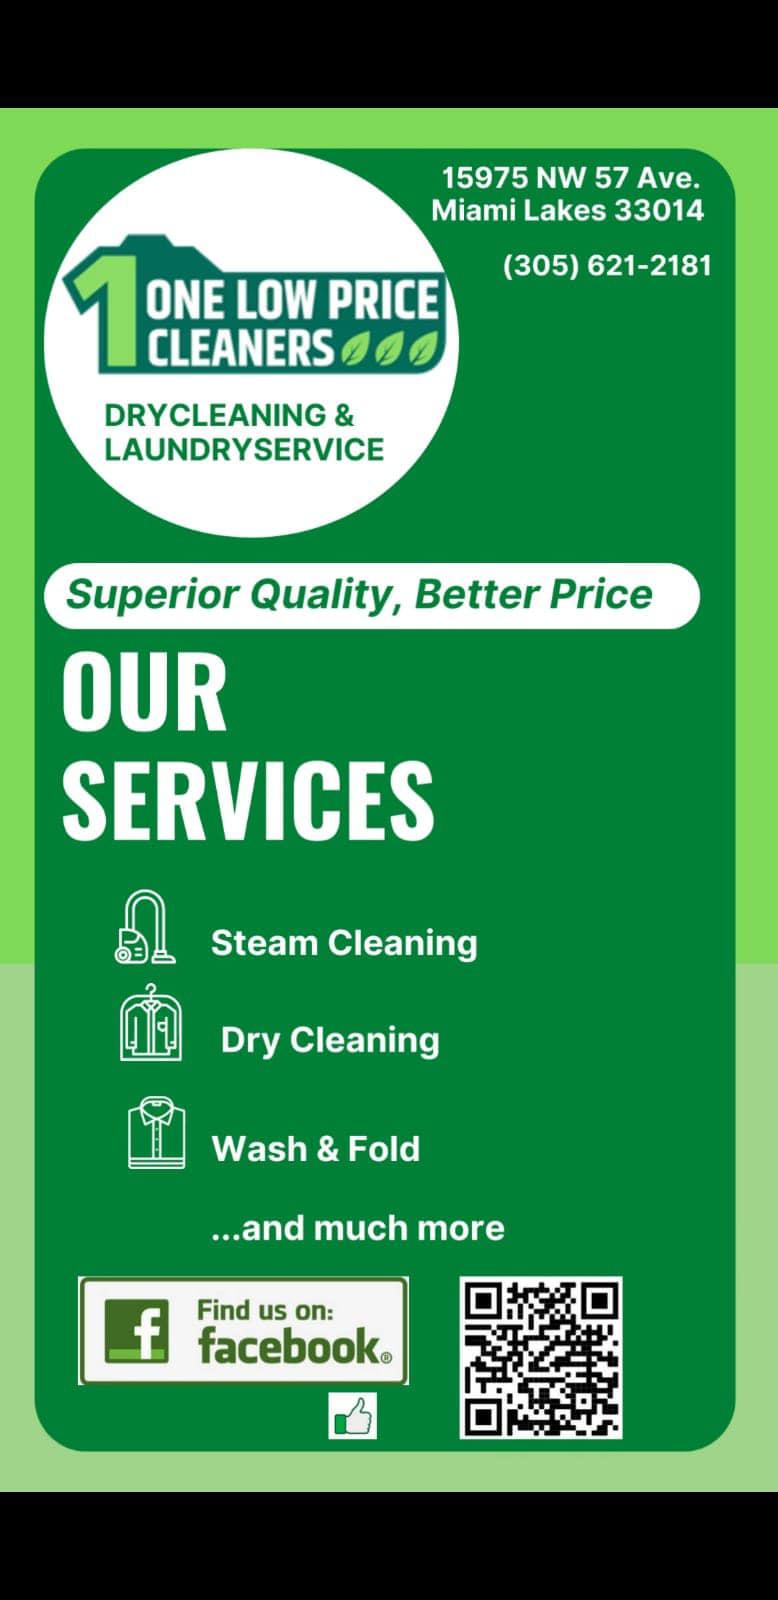 One Low Price Cleaners